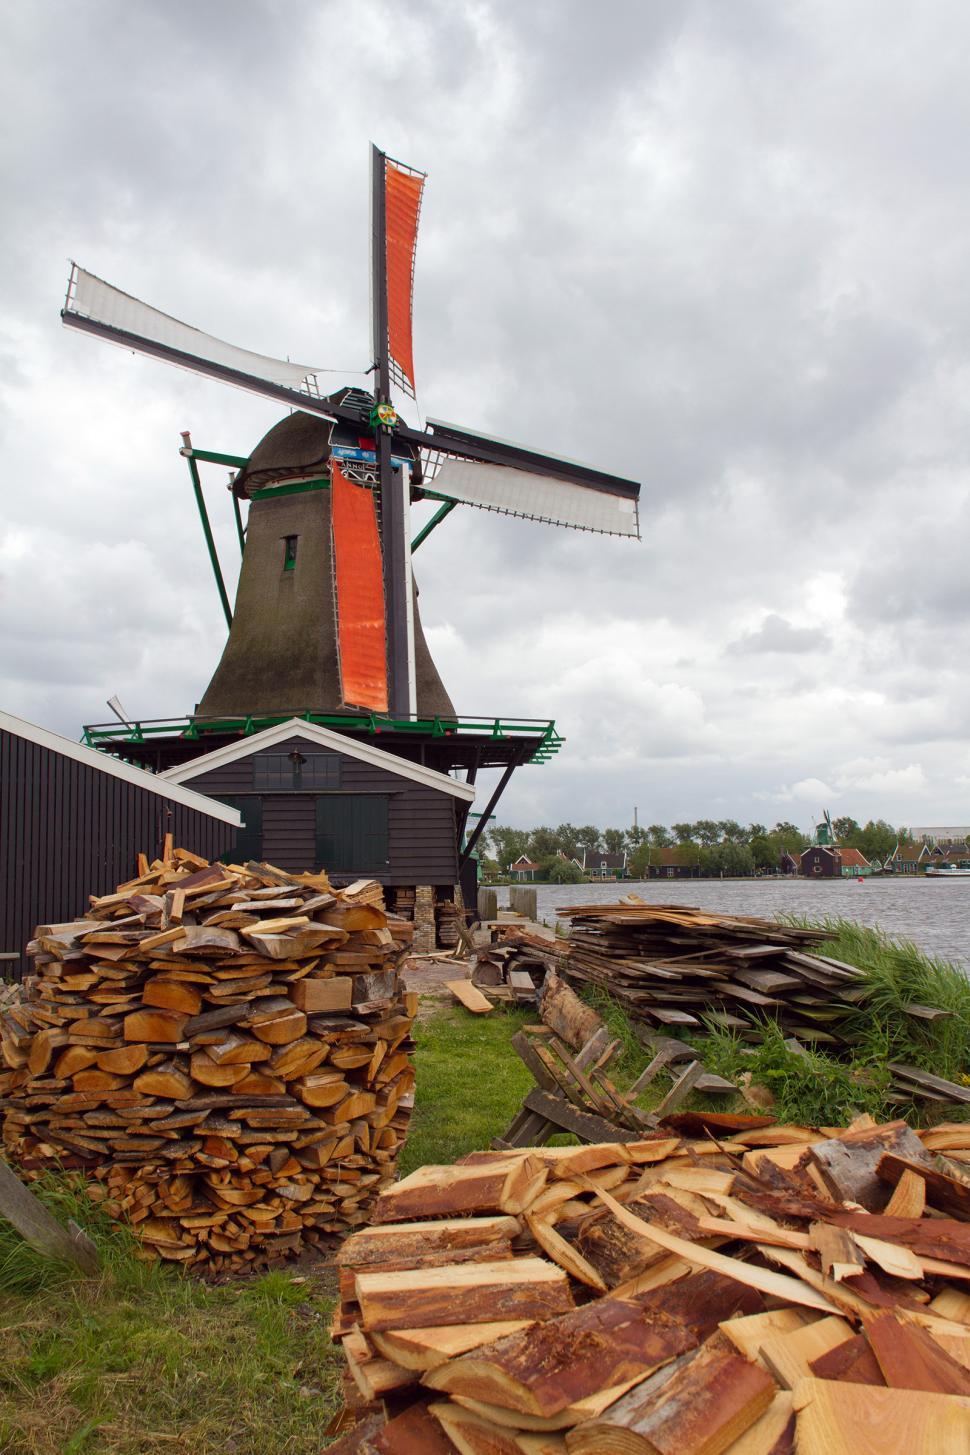 Free Image of Windmill and Wood Logs 